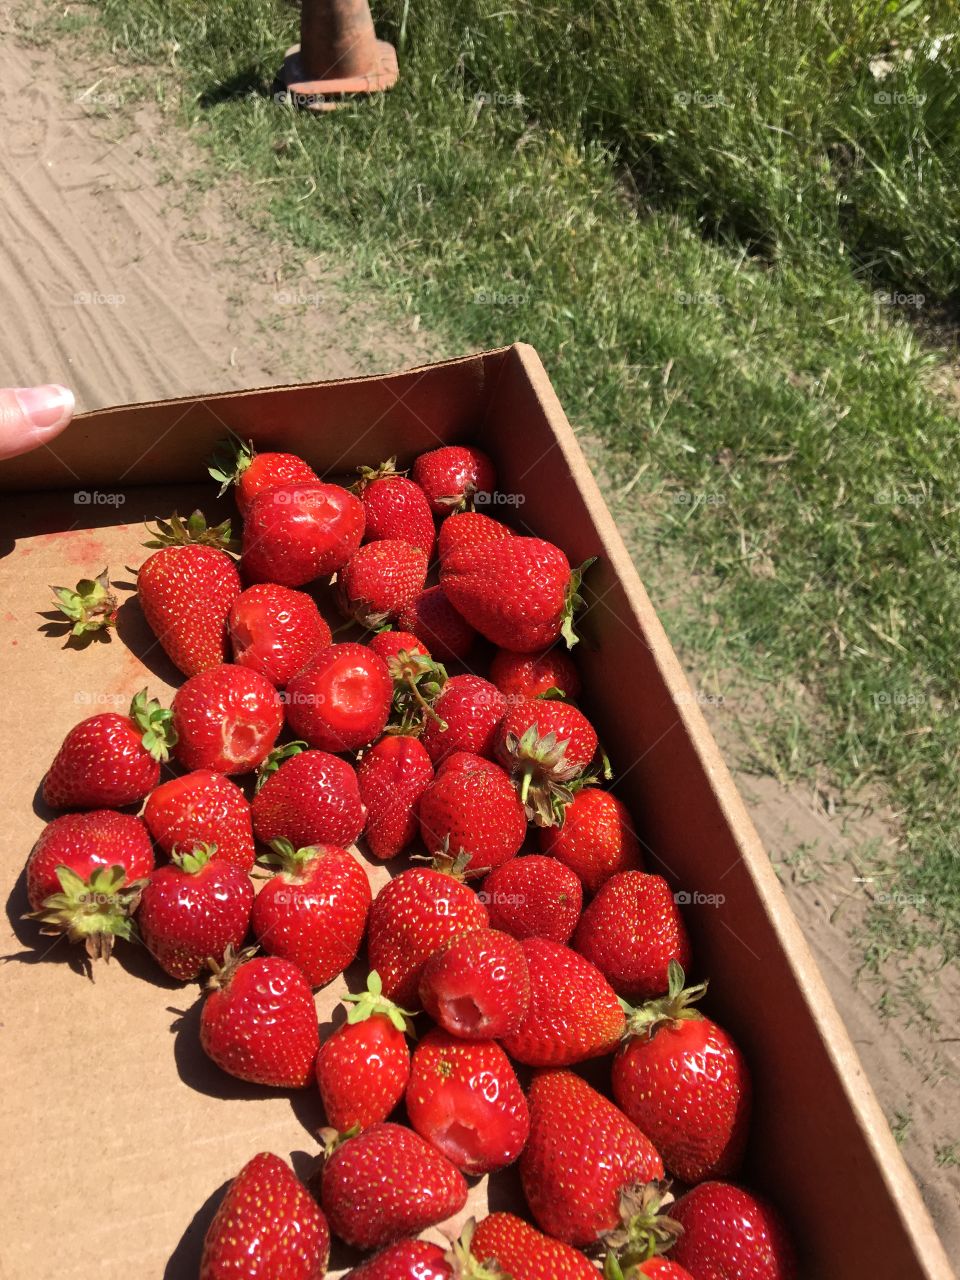 Picking out farm fresh red strawberries on a beautiful sunny day